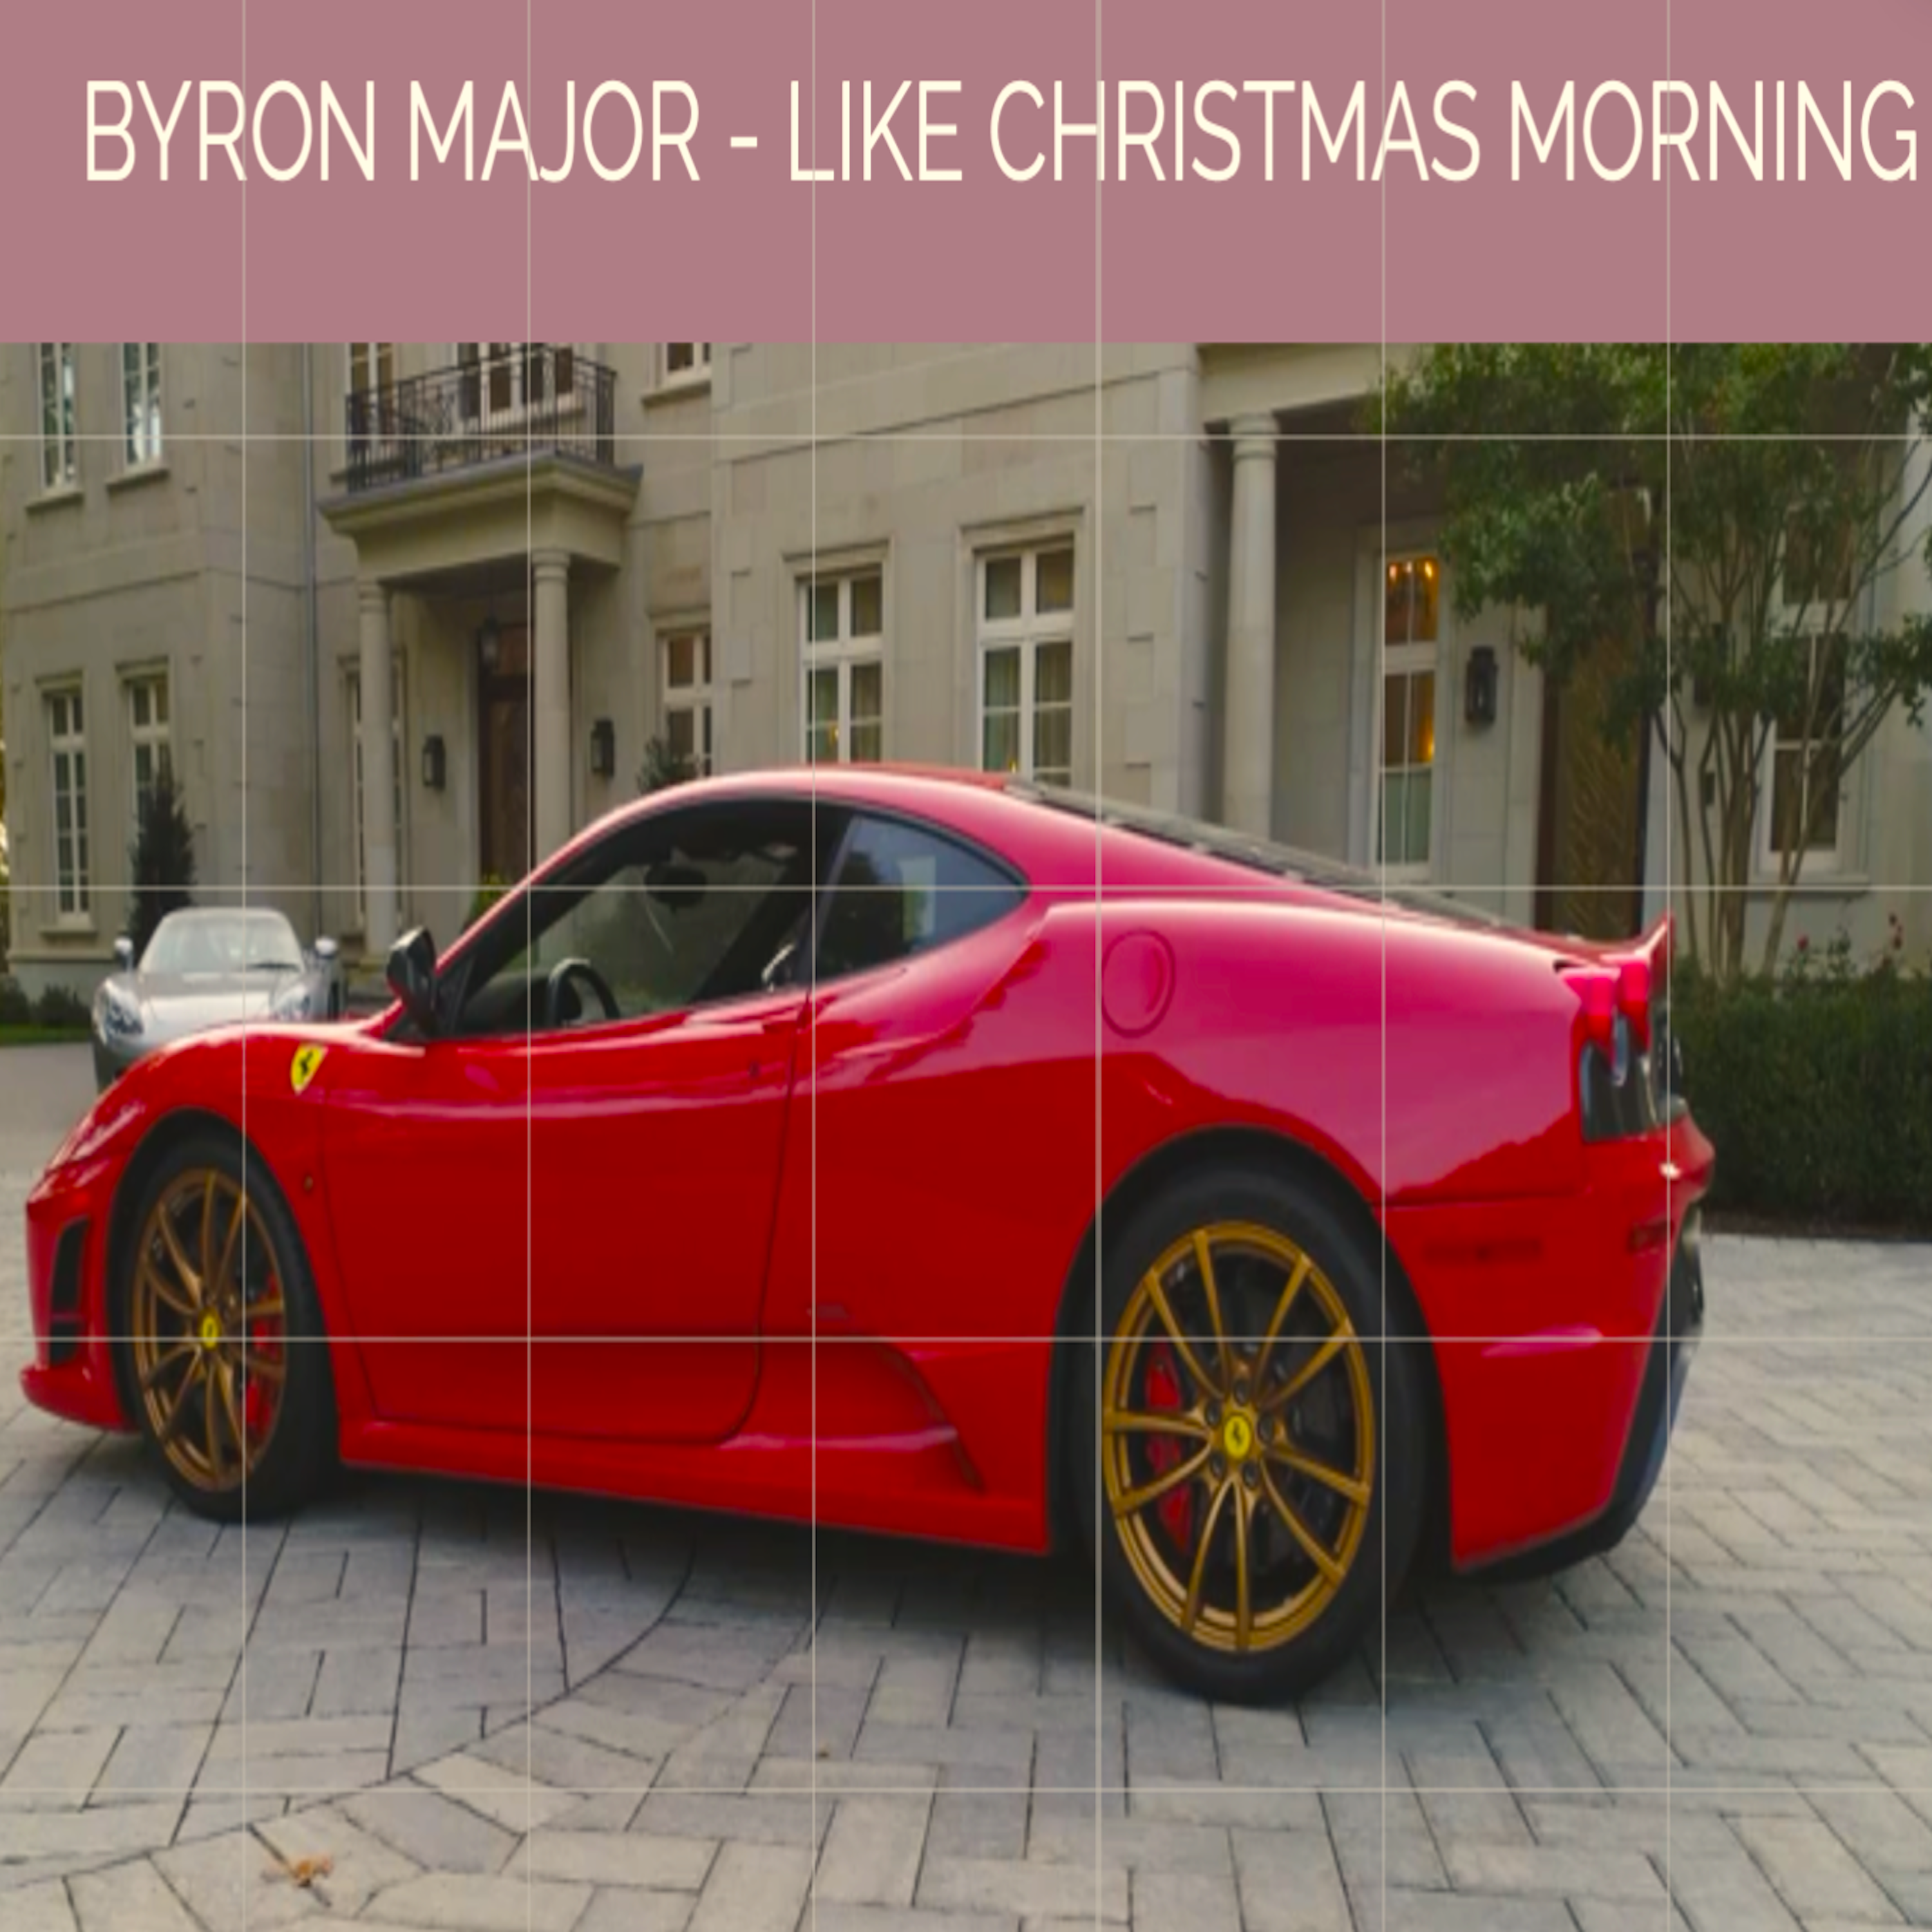 From Berklee to Your Playlist: Byron Major’s ‘Like Christmas Morning’ Is Here for the Holidays